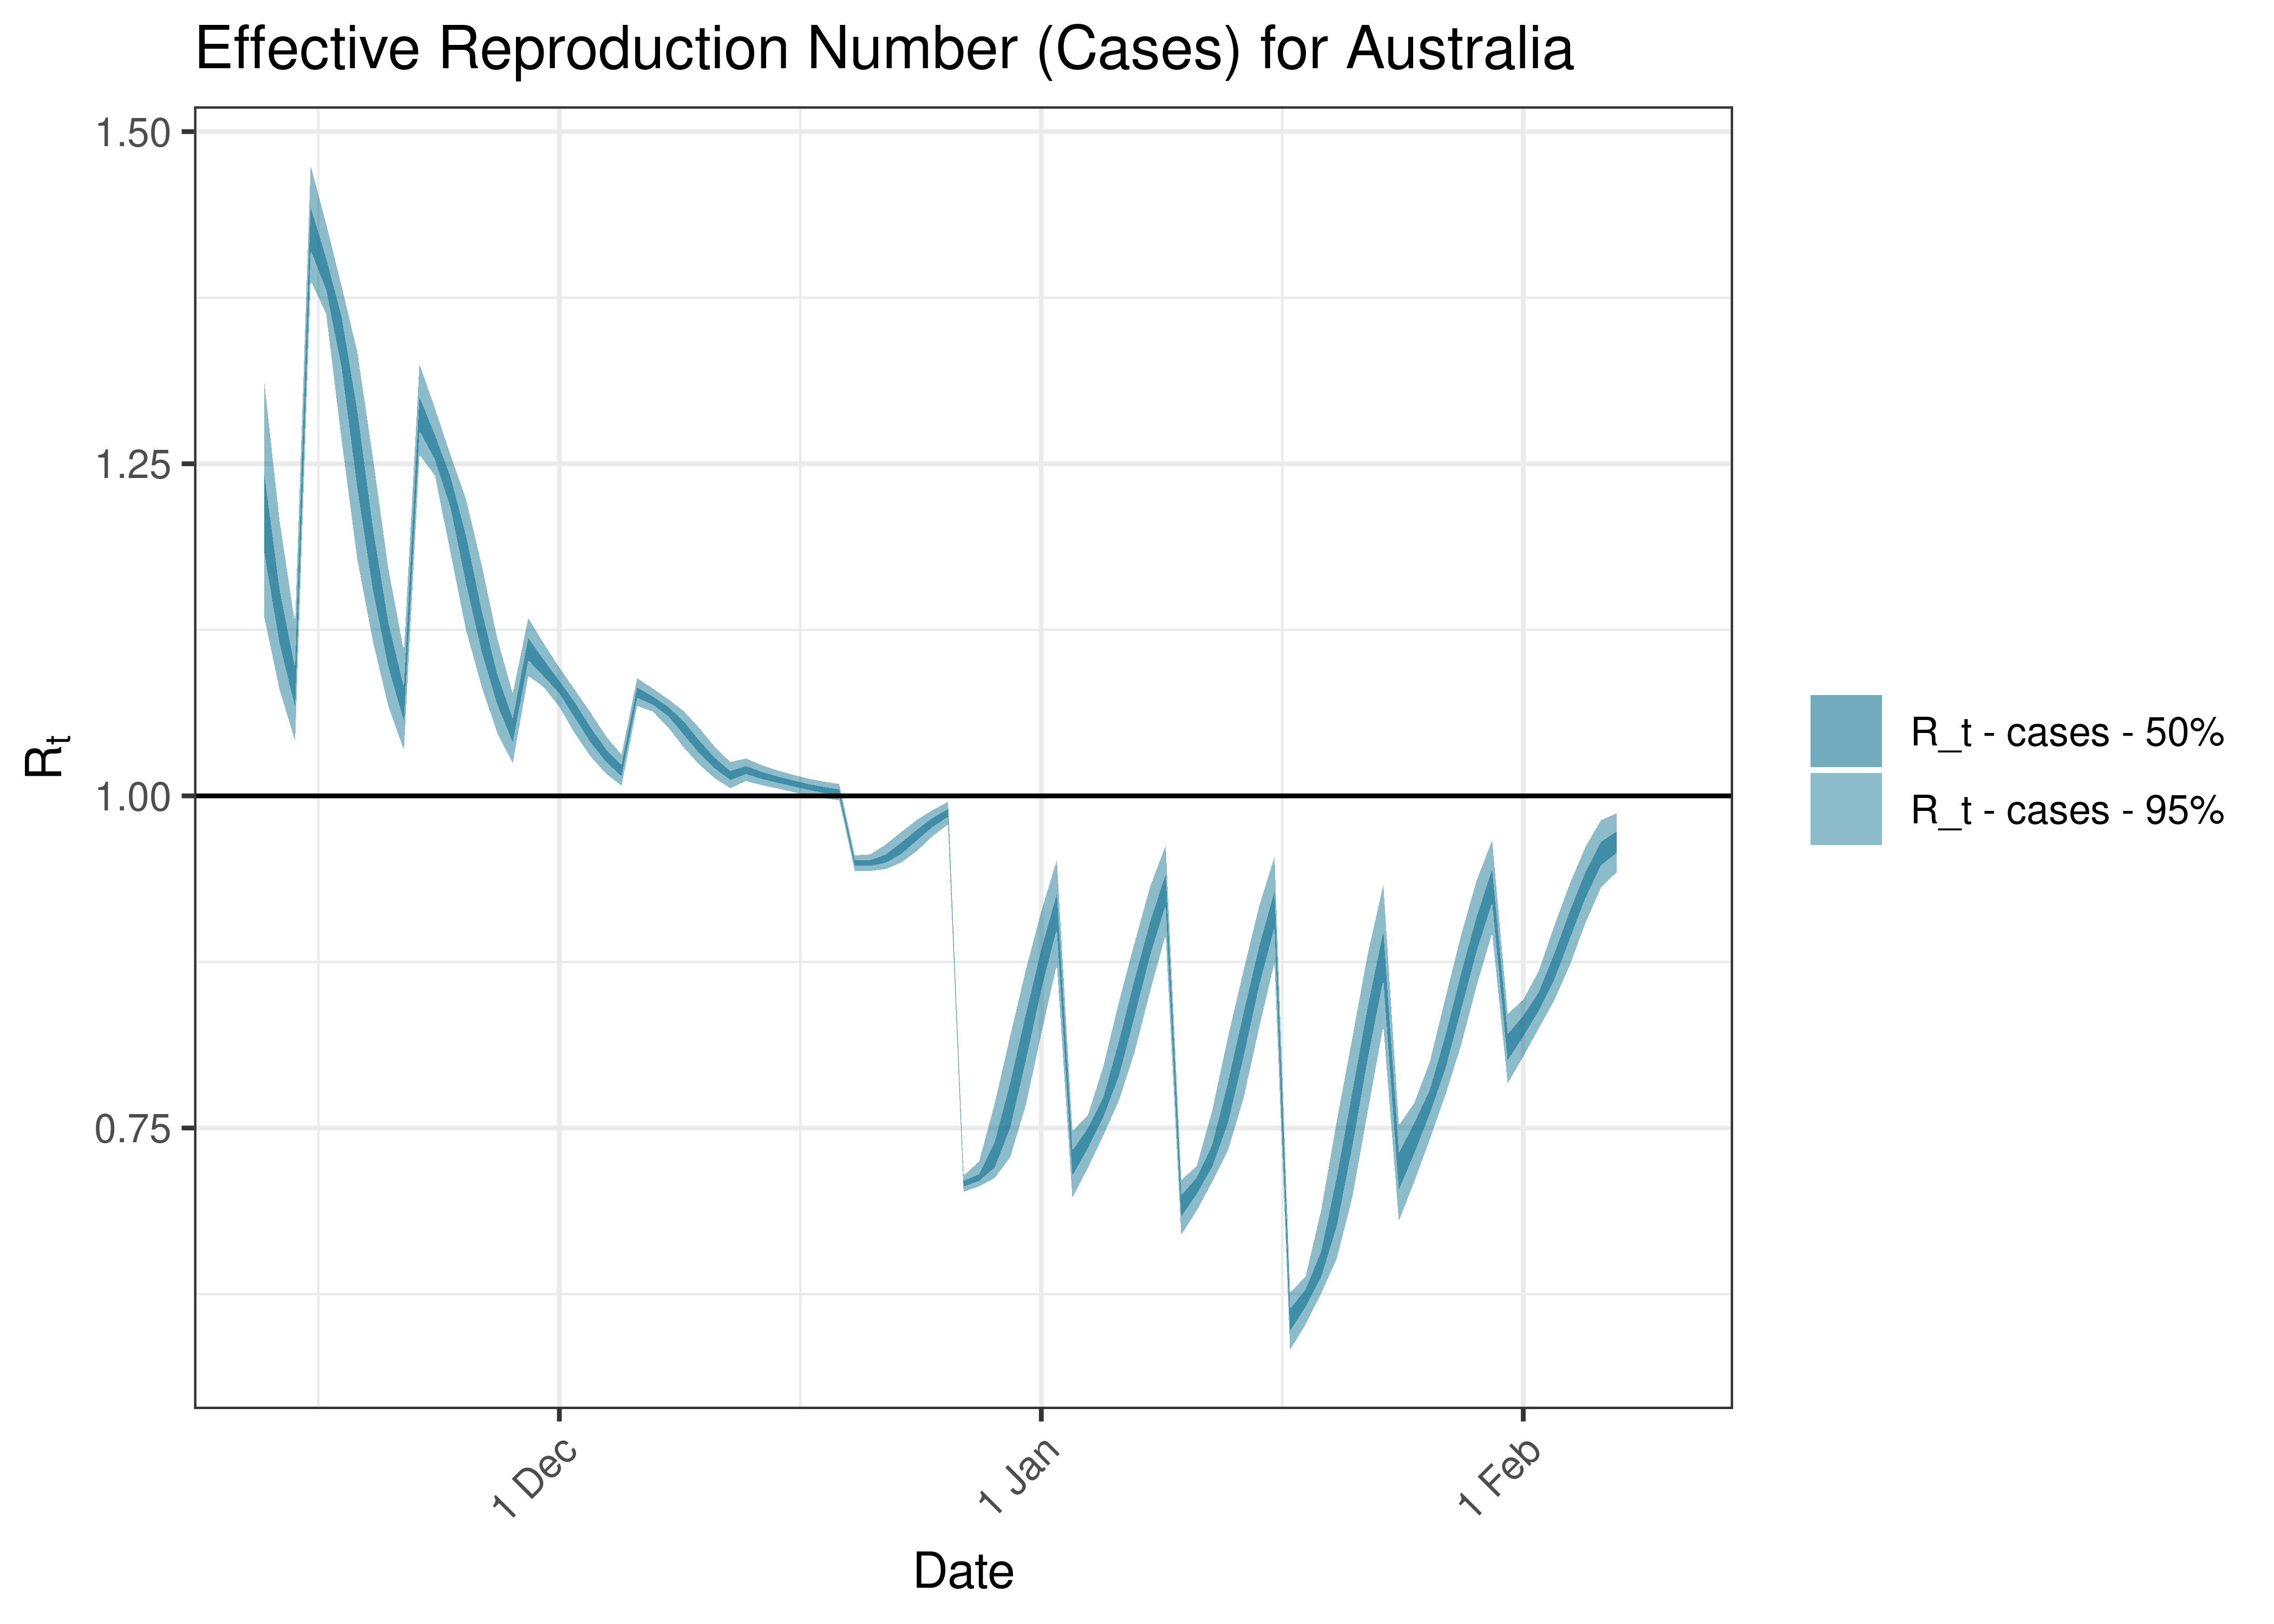 Estimated Effective Reproduction Number Based on Cases for Australia over last 90 days